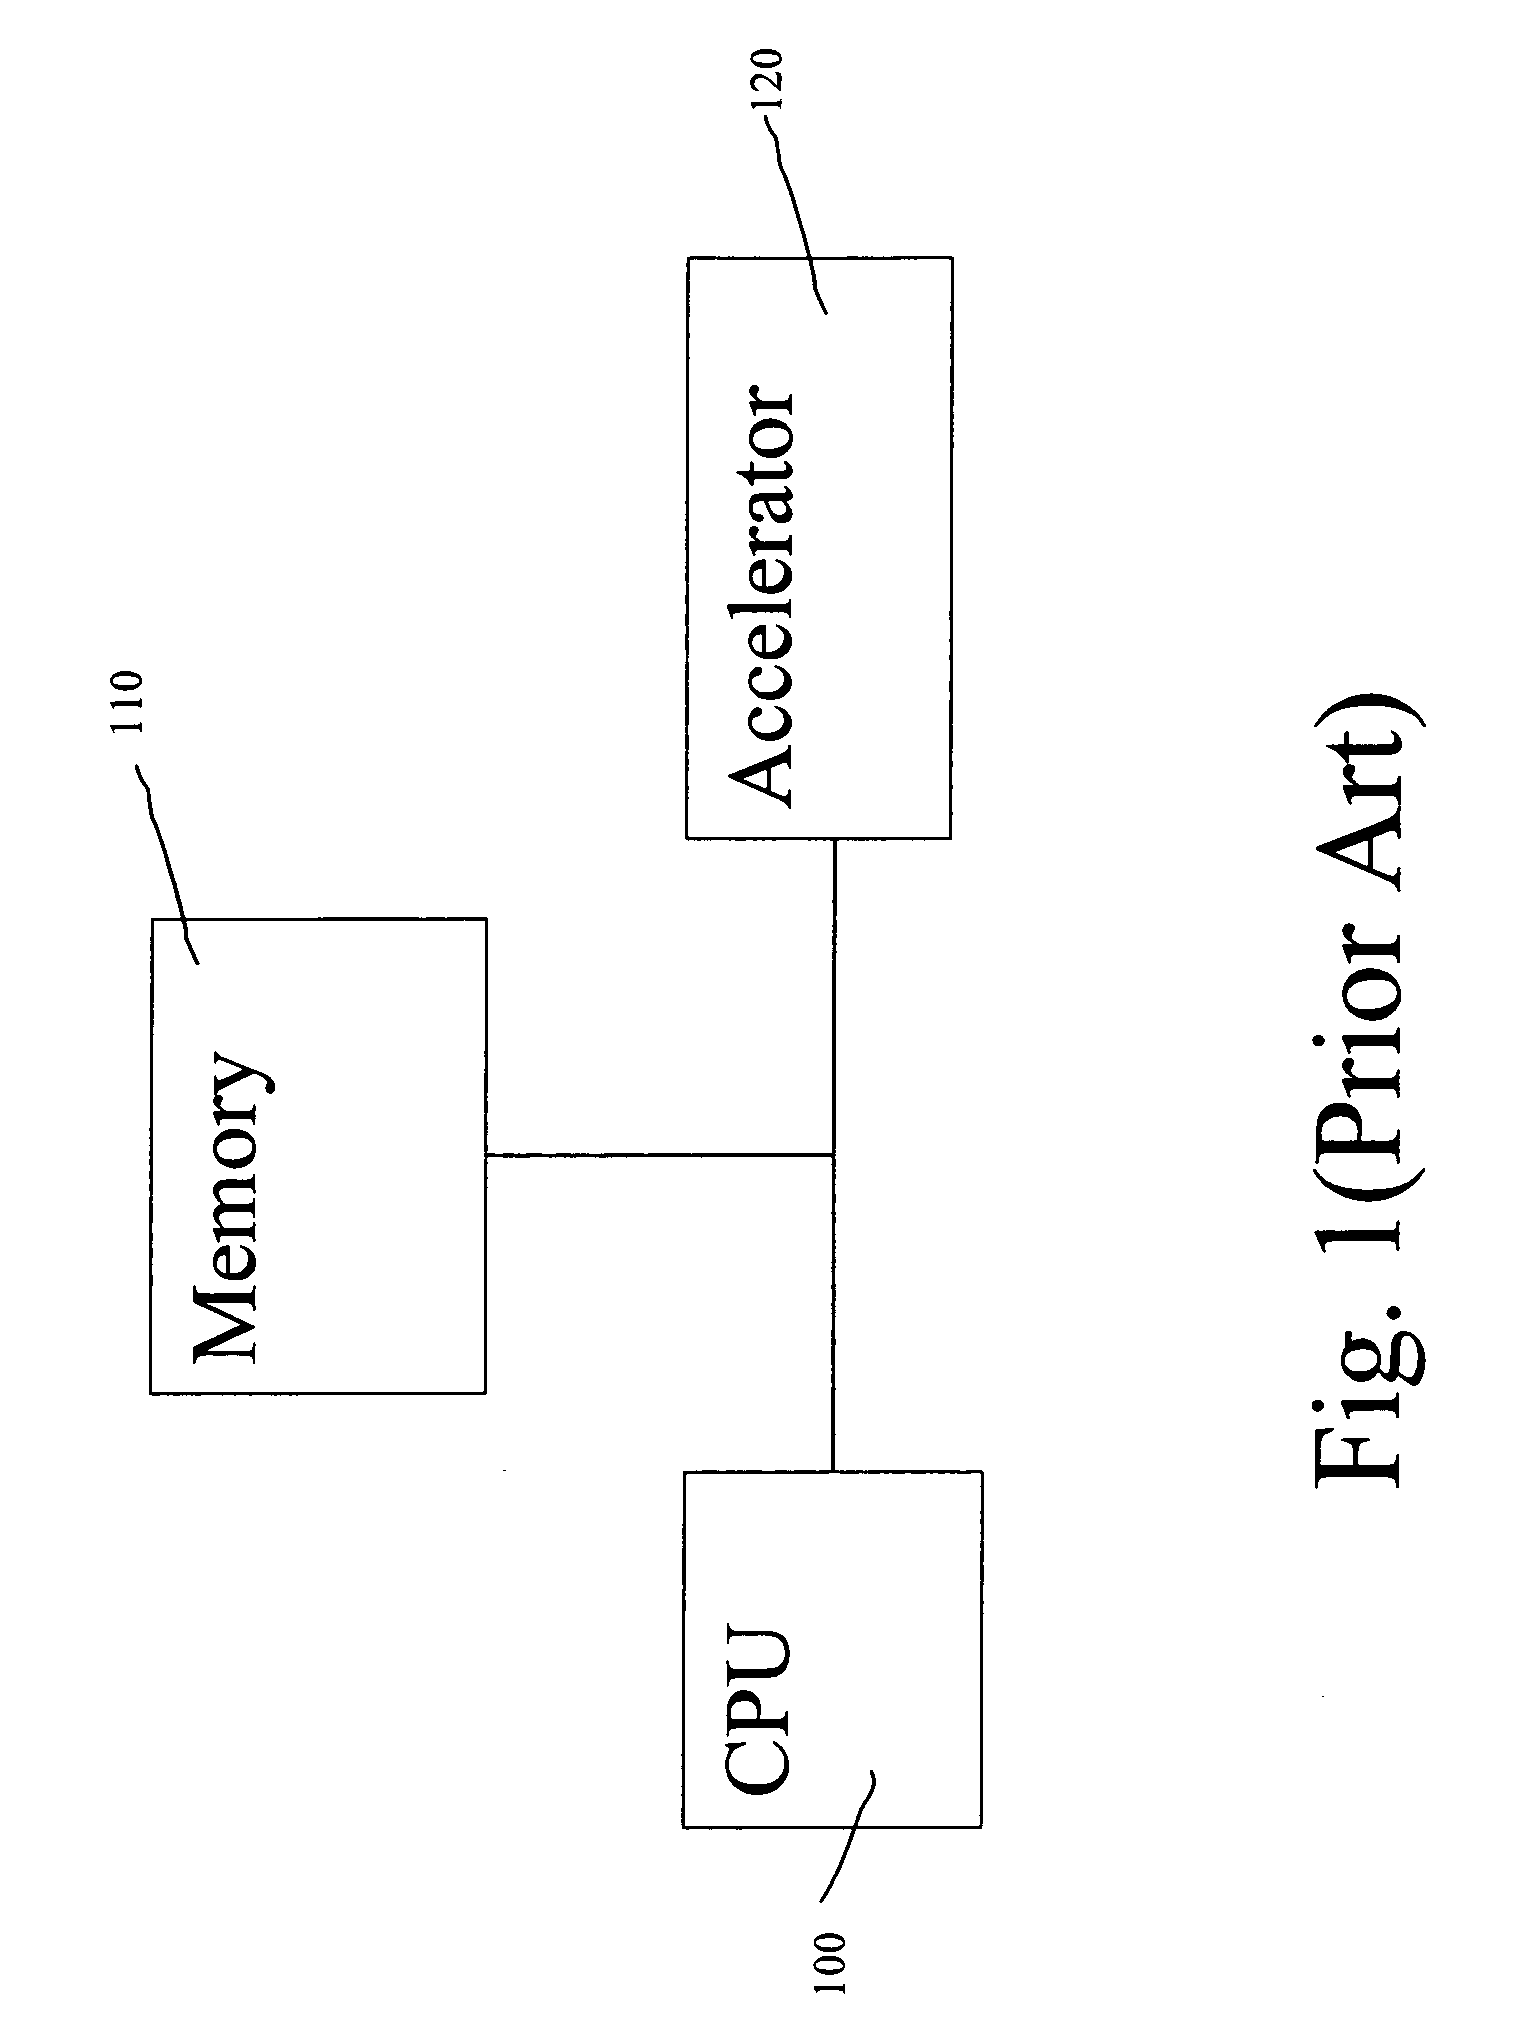 Apparatus and method for high speed IPSec processing